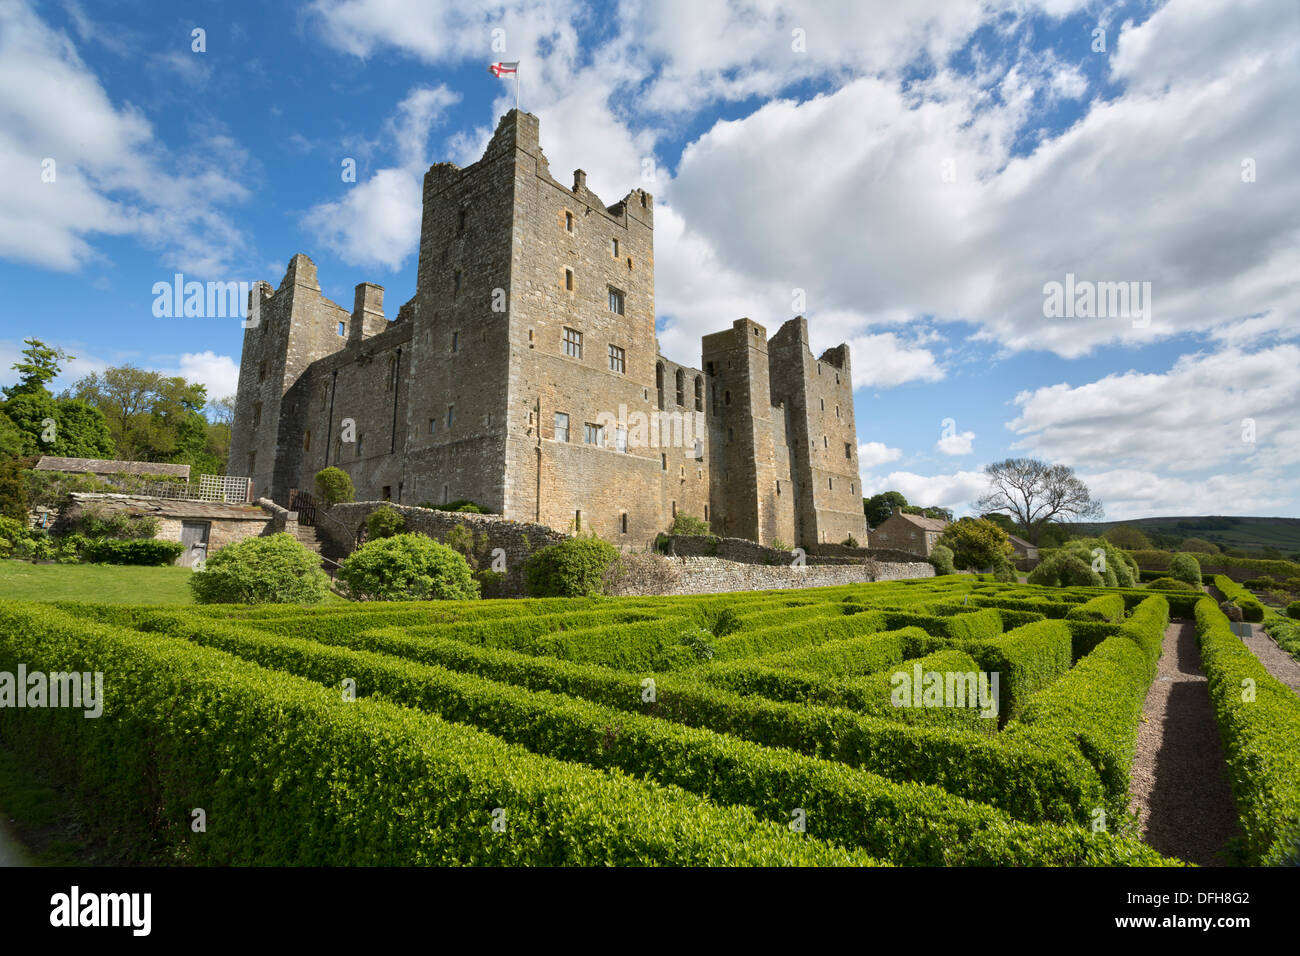 Bolton Castle in Wensleydale, The Yorkshire Dales, England. Stock Photo